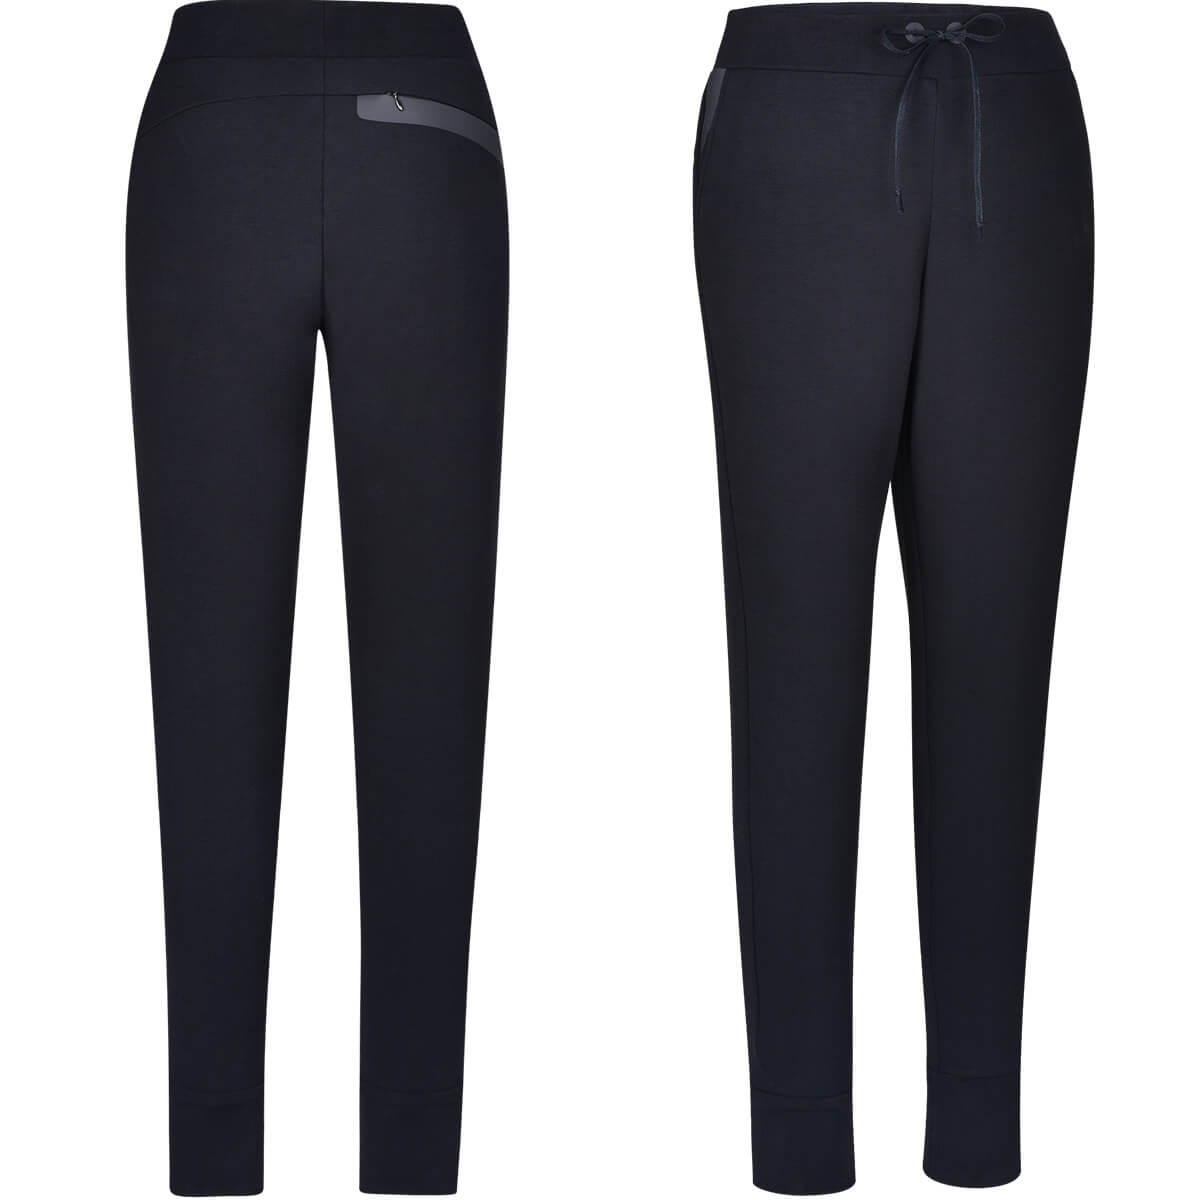 jogger pant back and side